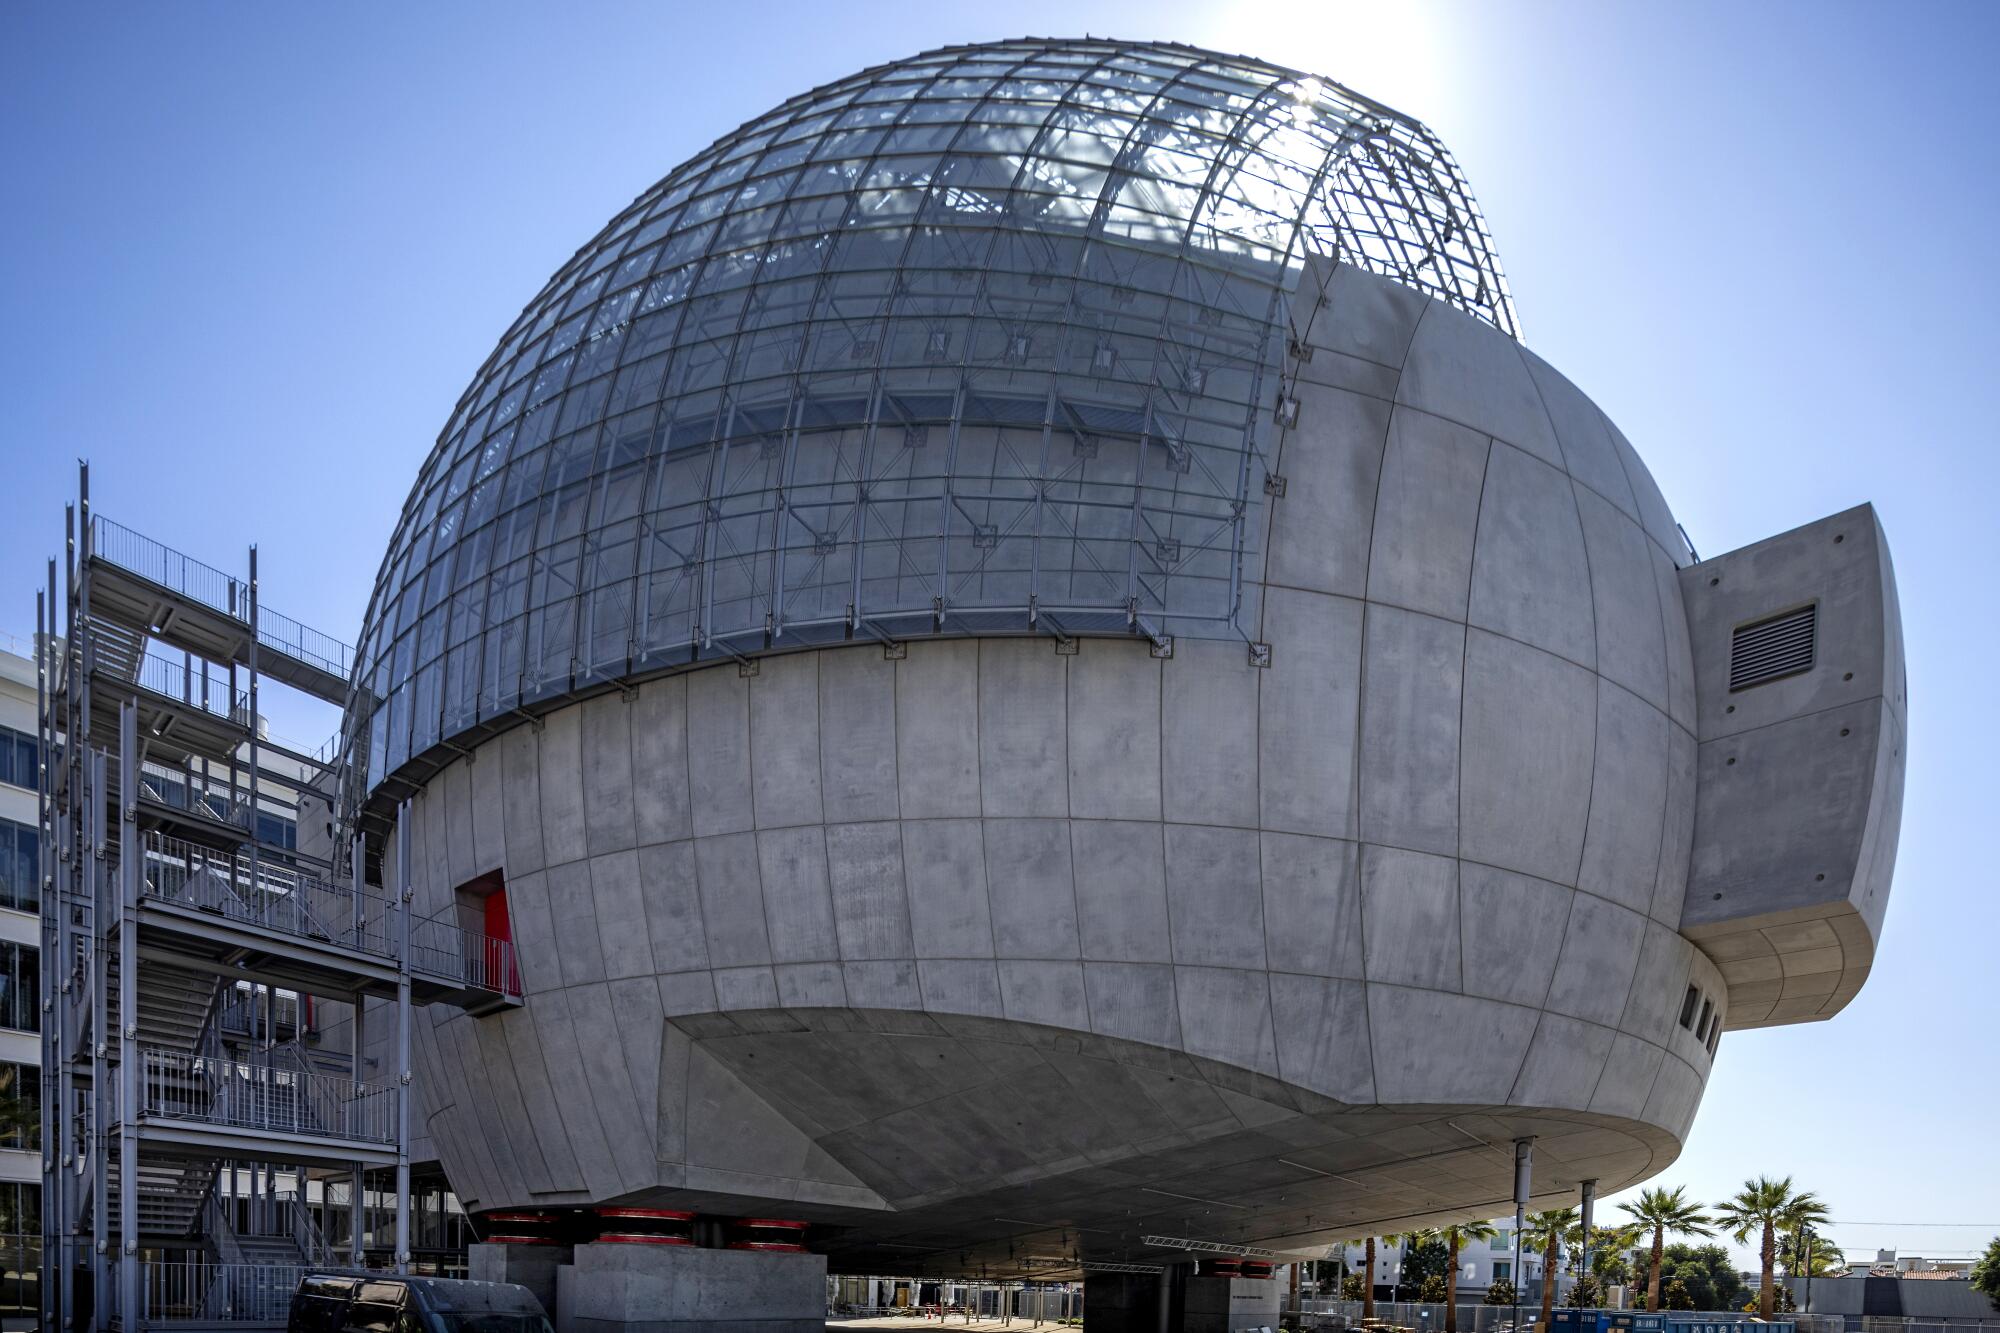 A view of the spherical David Geffen Theater from below shows the building hovering over four plinths.